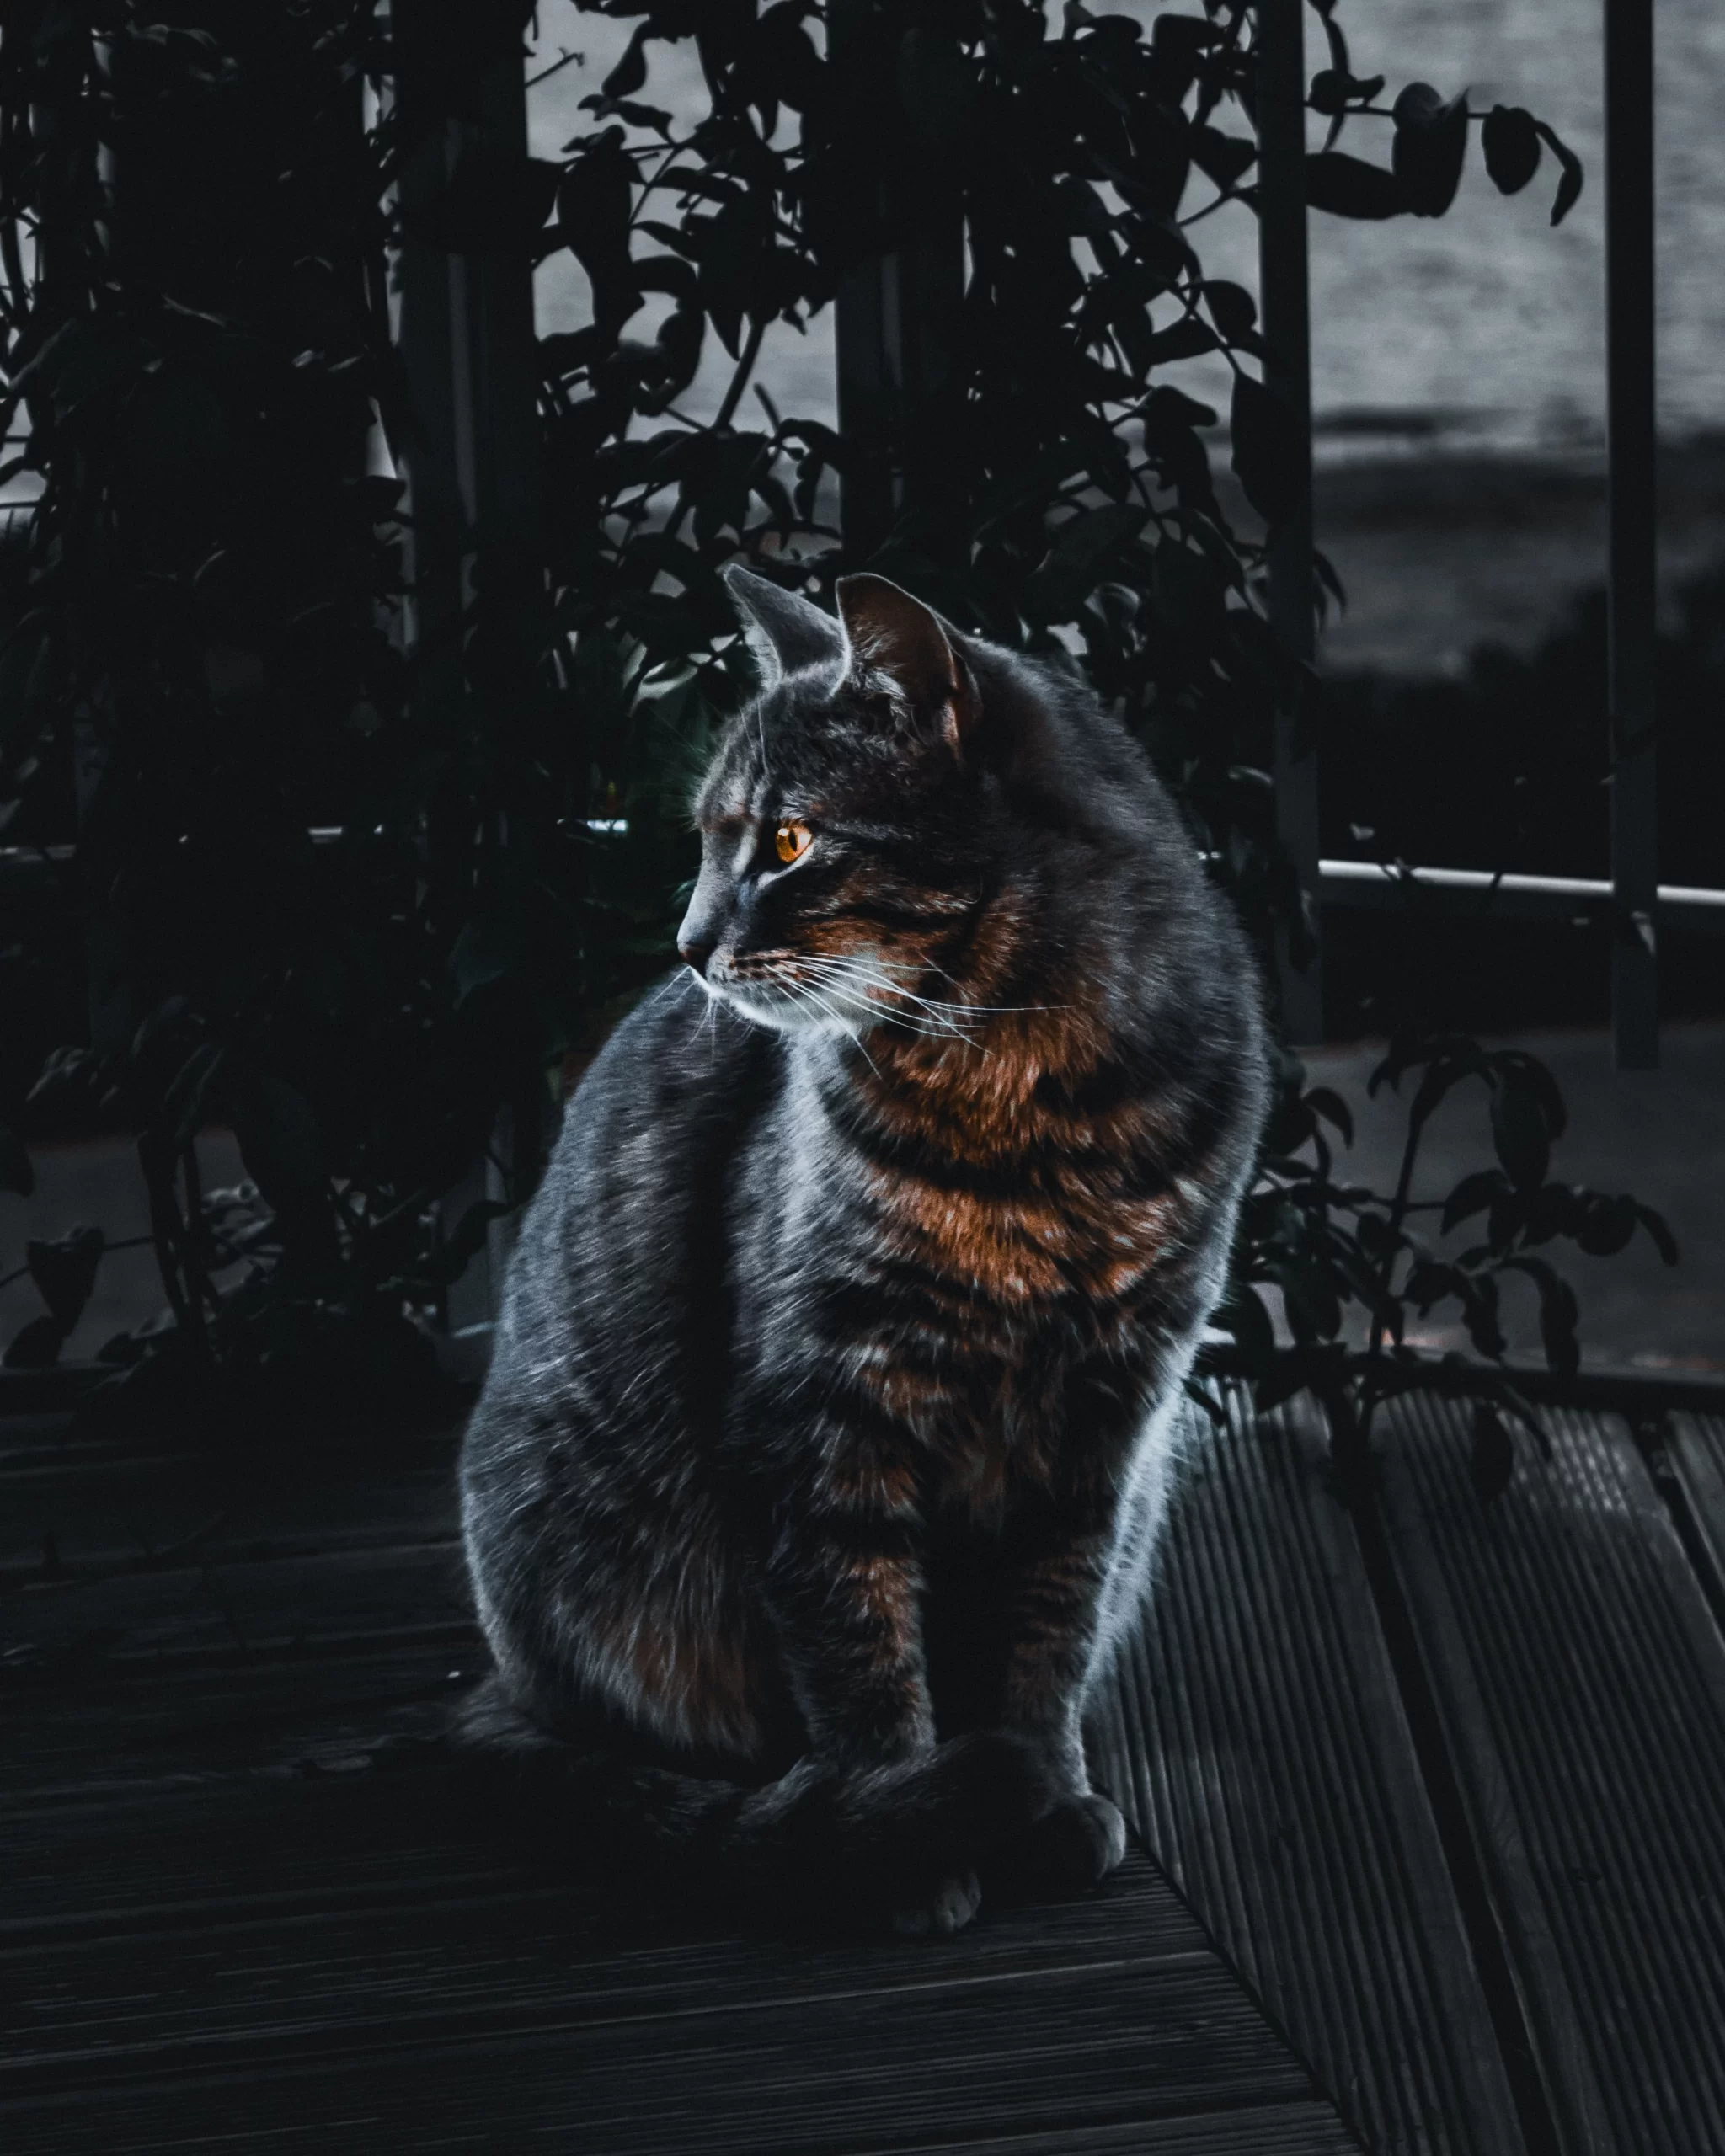 luke-stackpoole-Beautiful house cat in shadow against a window in home-unsplash